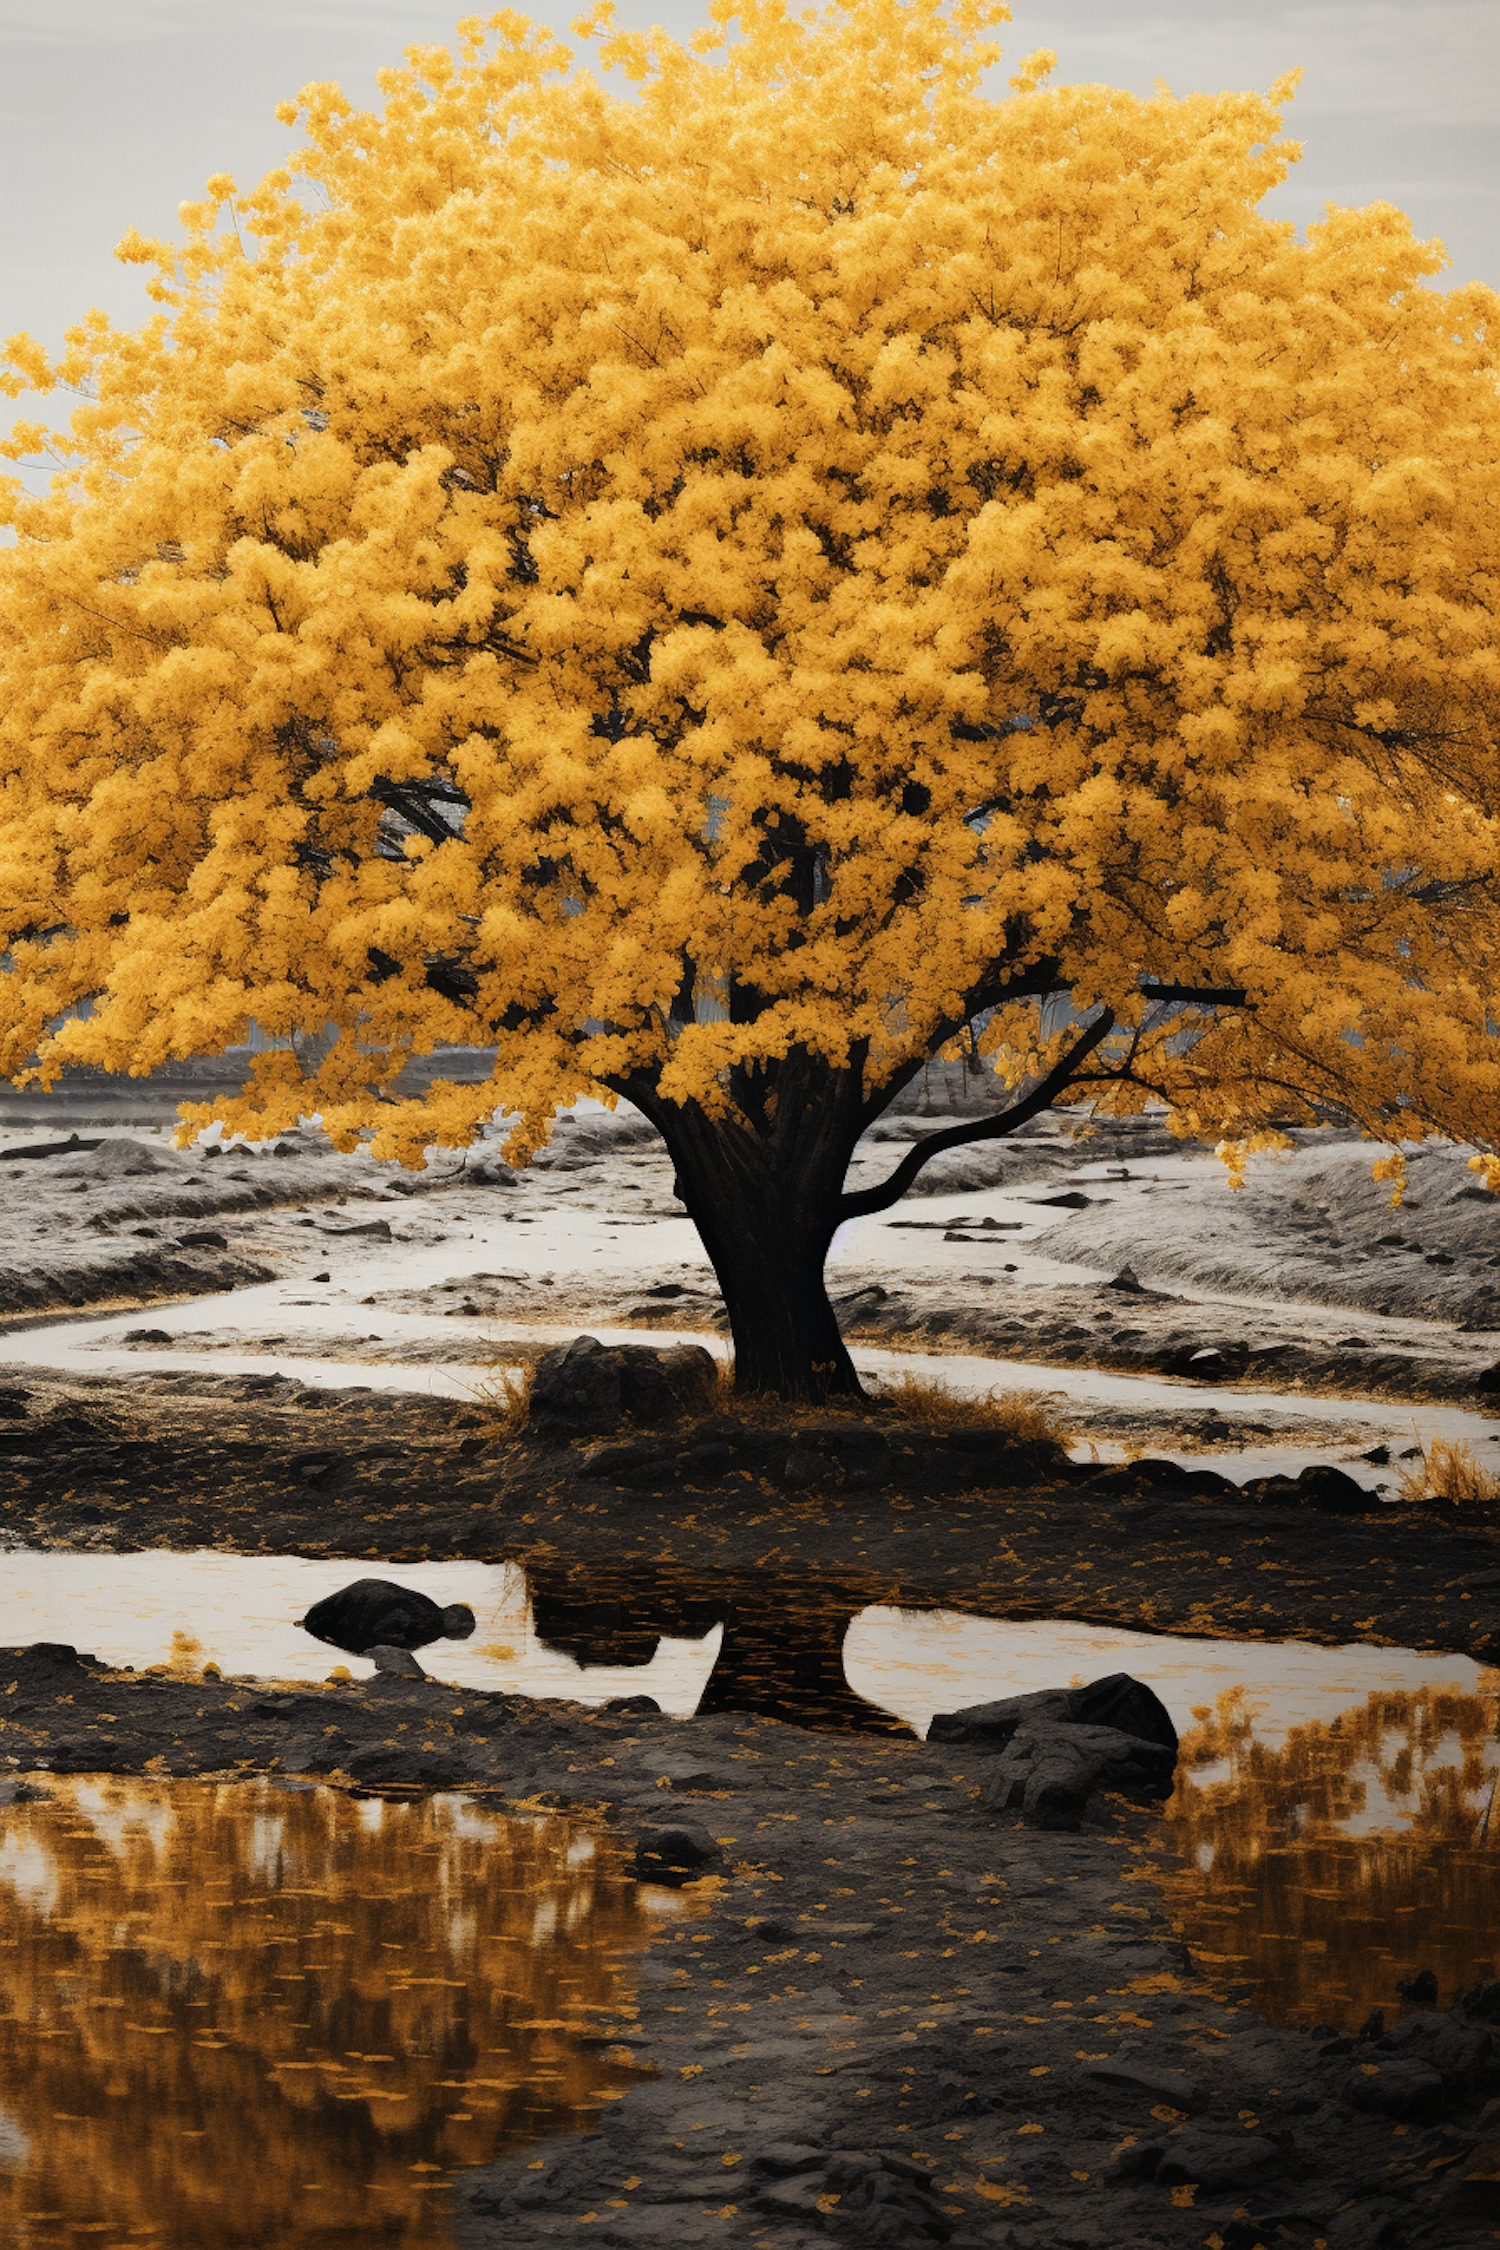 Autumn Reflections: The Golden Tree